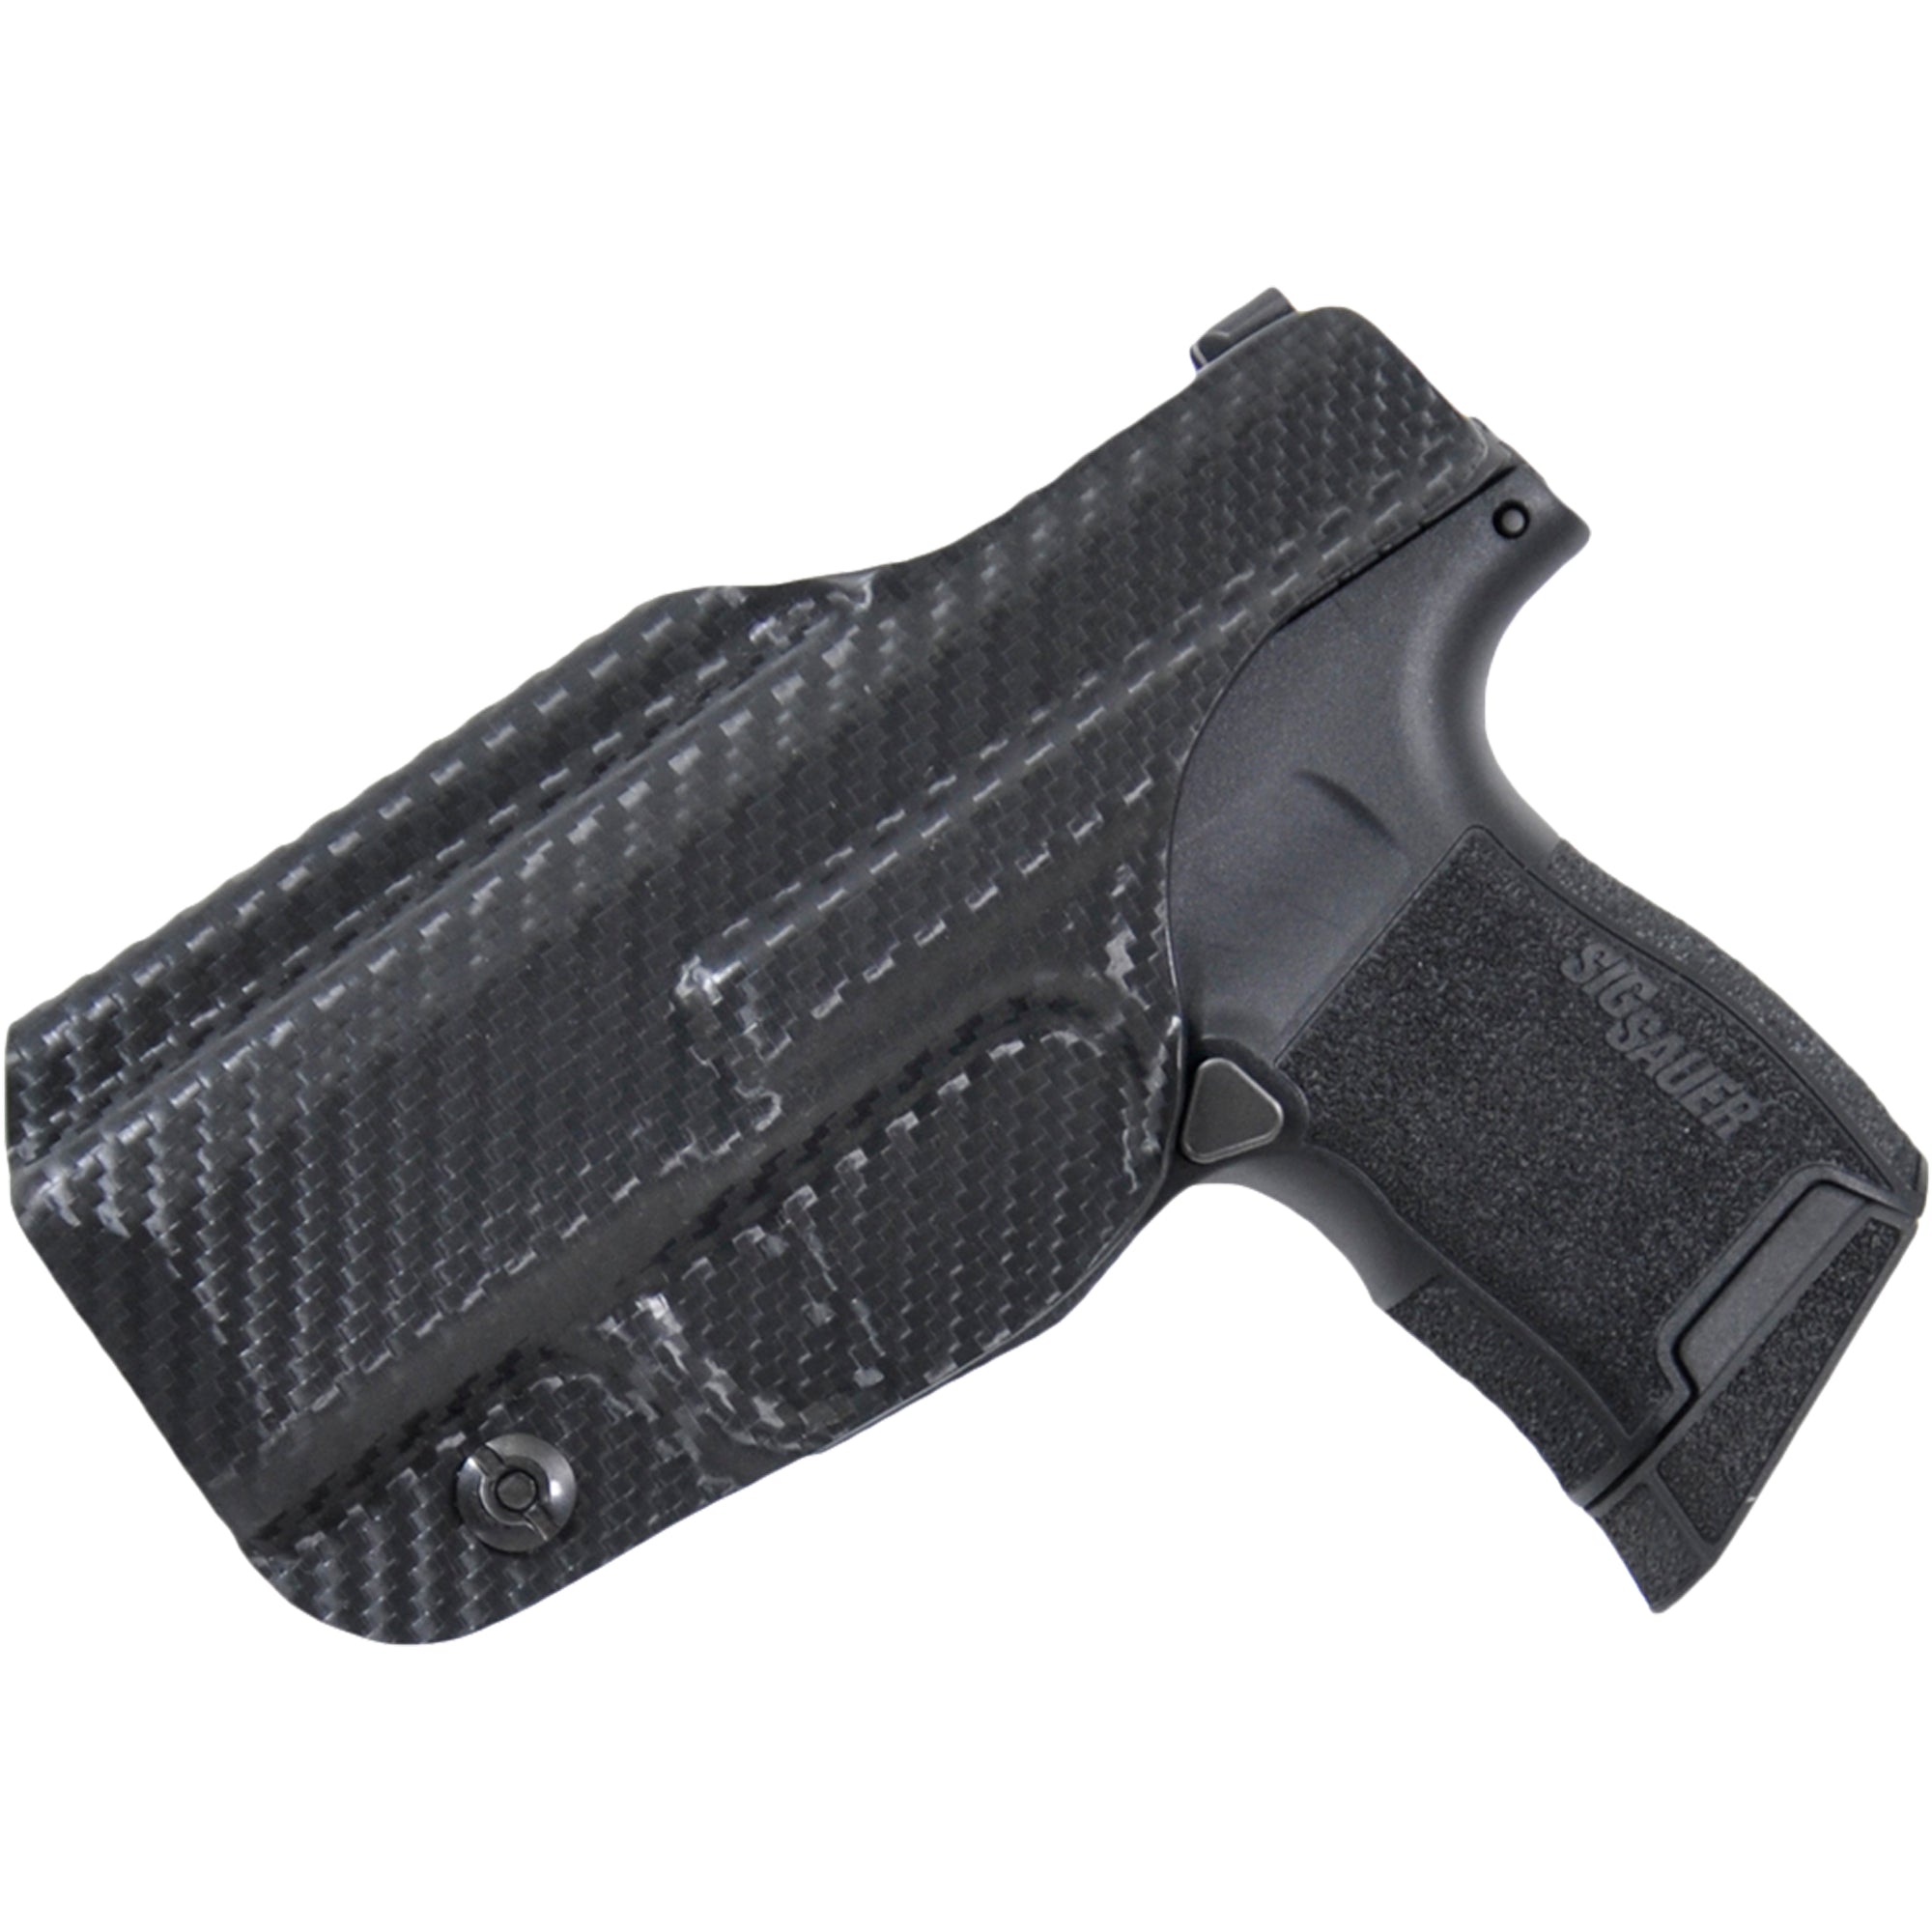 Sig P365 Holster IWB Kydex for Sig Sauer P365 Holsters Concealed Carry -  Kydex IWB Holster for Sig P365 SAS Accessories - IWB Concealed Holster Sig  365 Pistol Case Pocket (Black, Right /